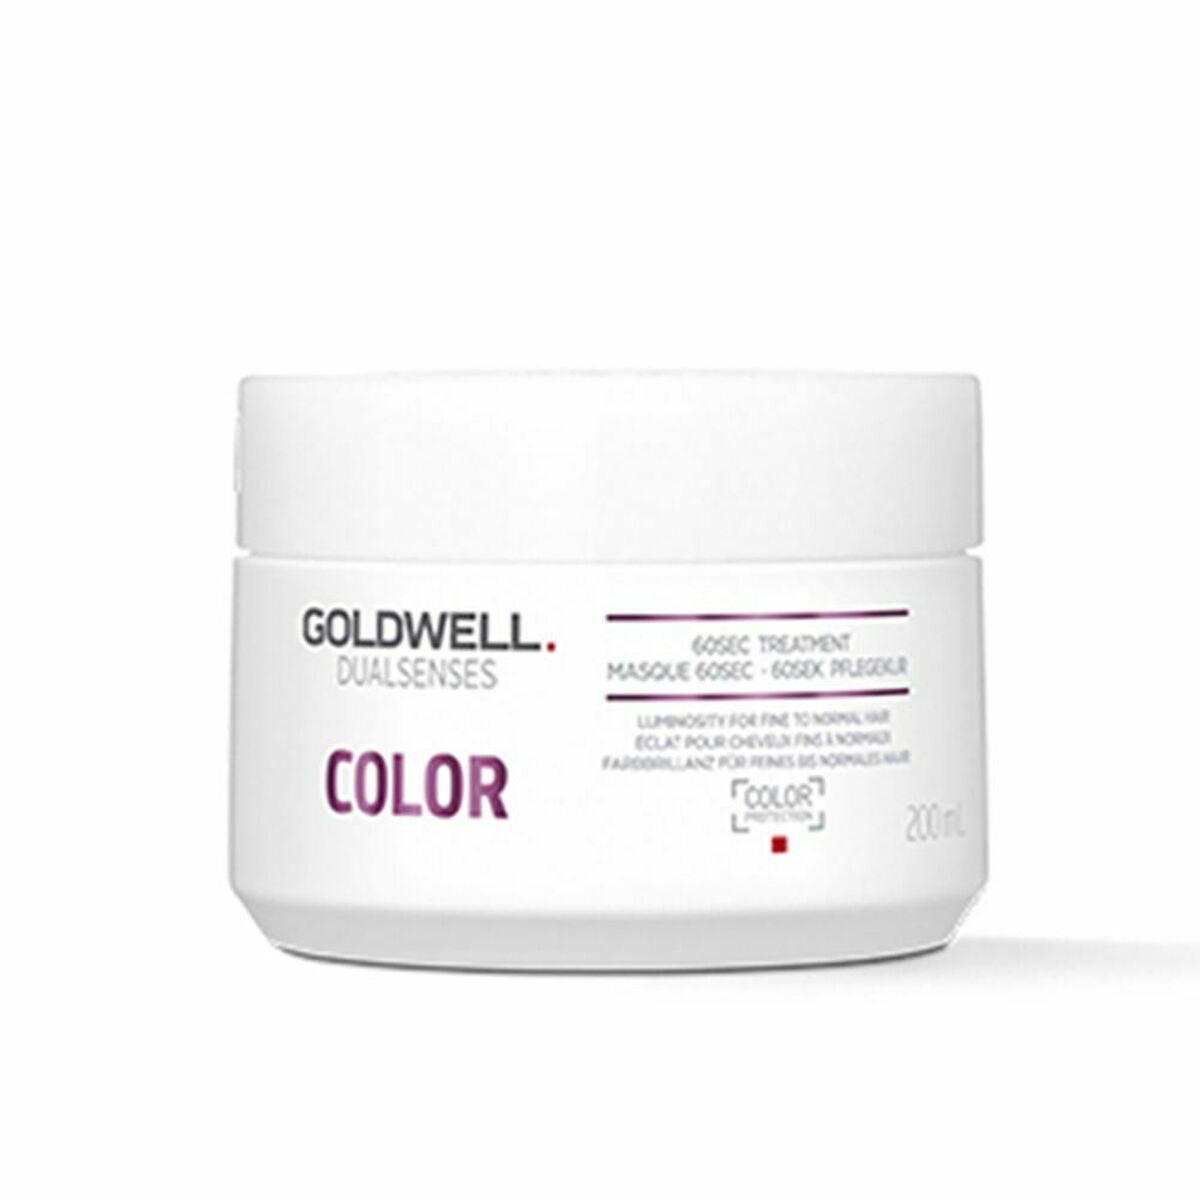 Colour Protector Cream Goldwell Color 200 ml | Goldwell | Aylal Beauty